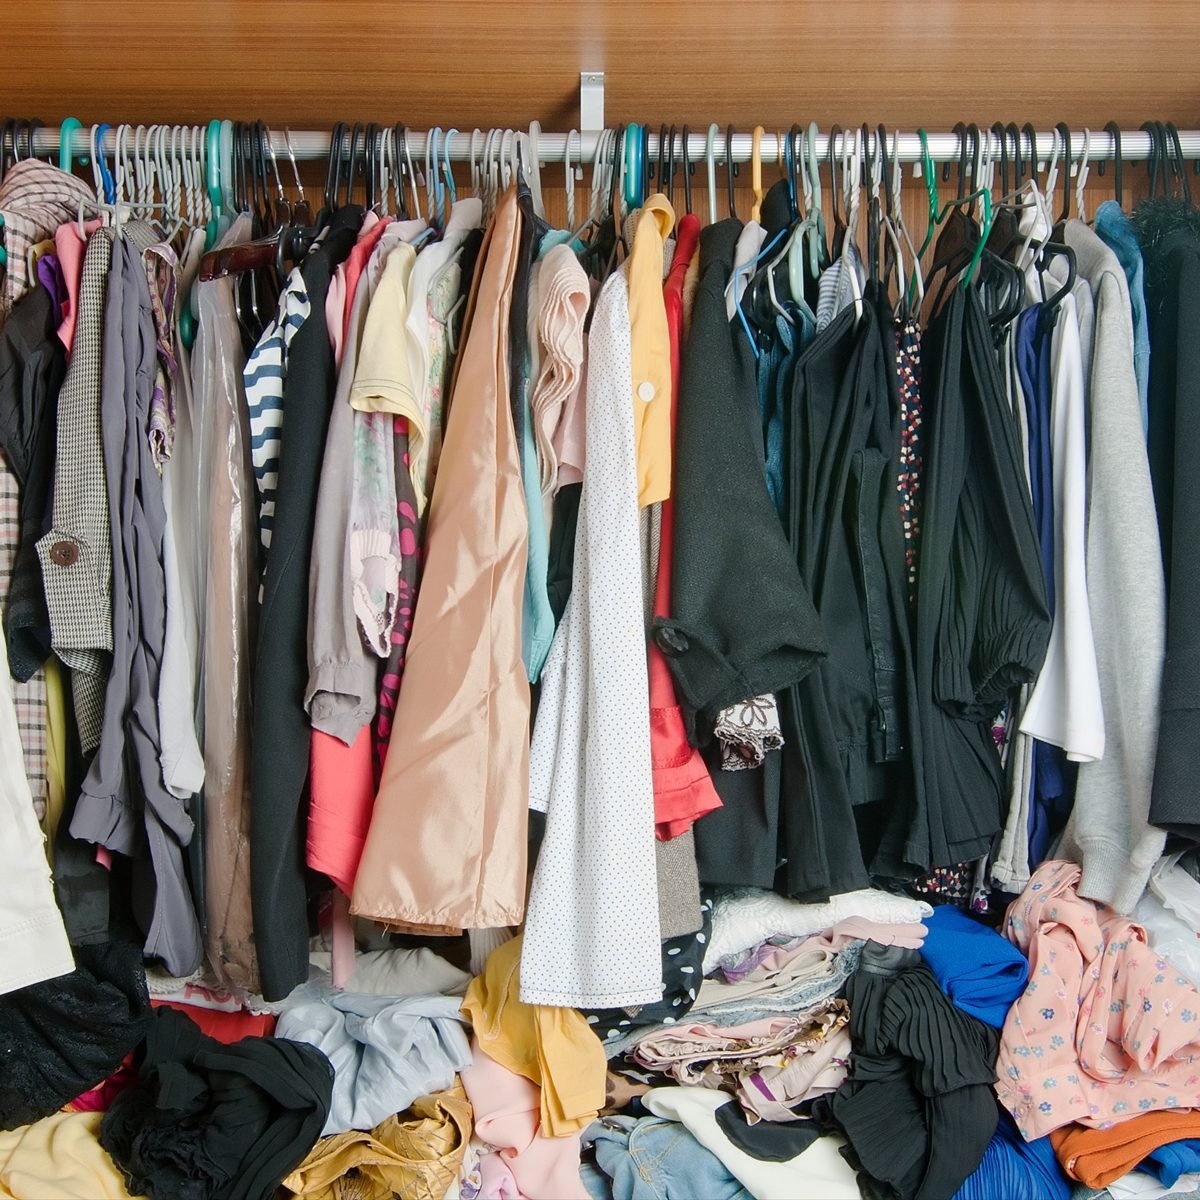 Clear out your clothing clutter